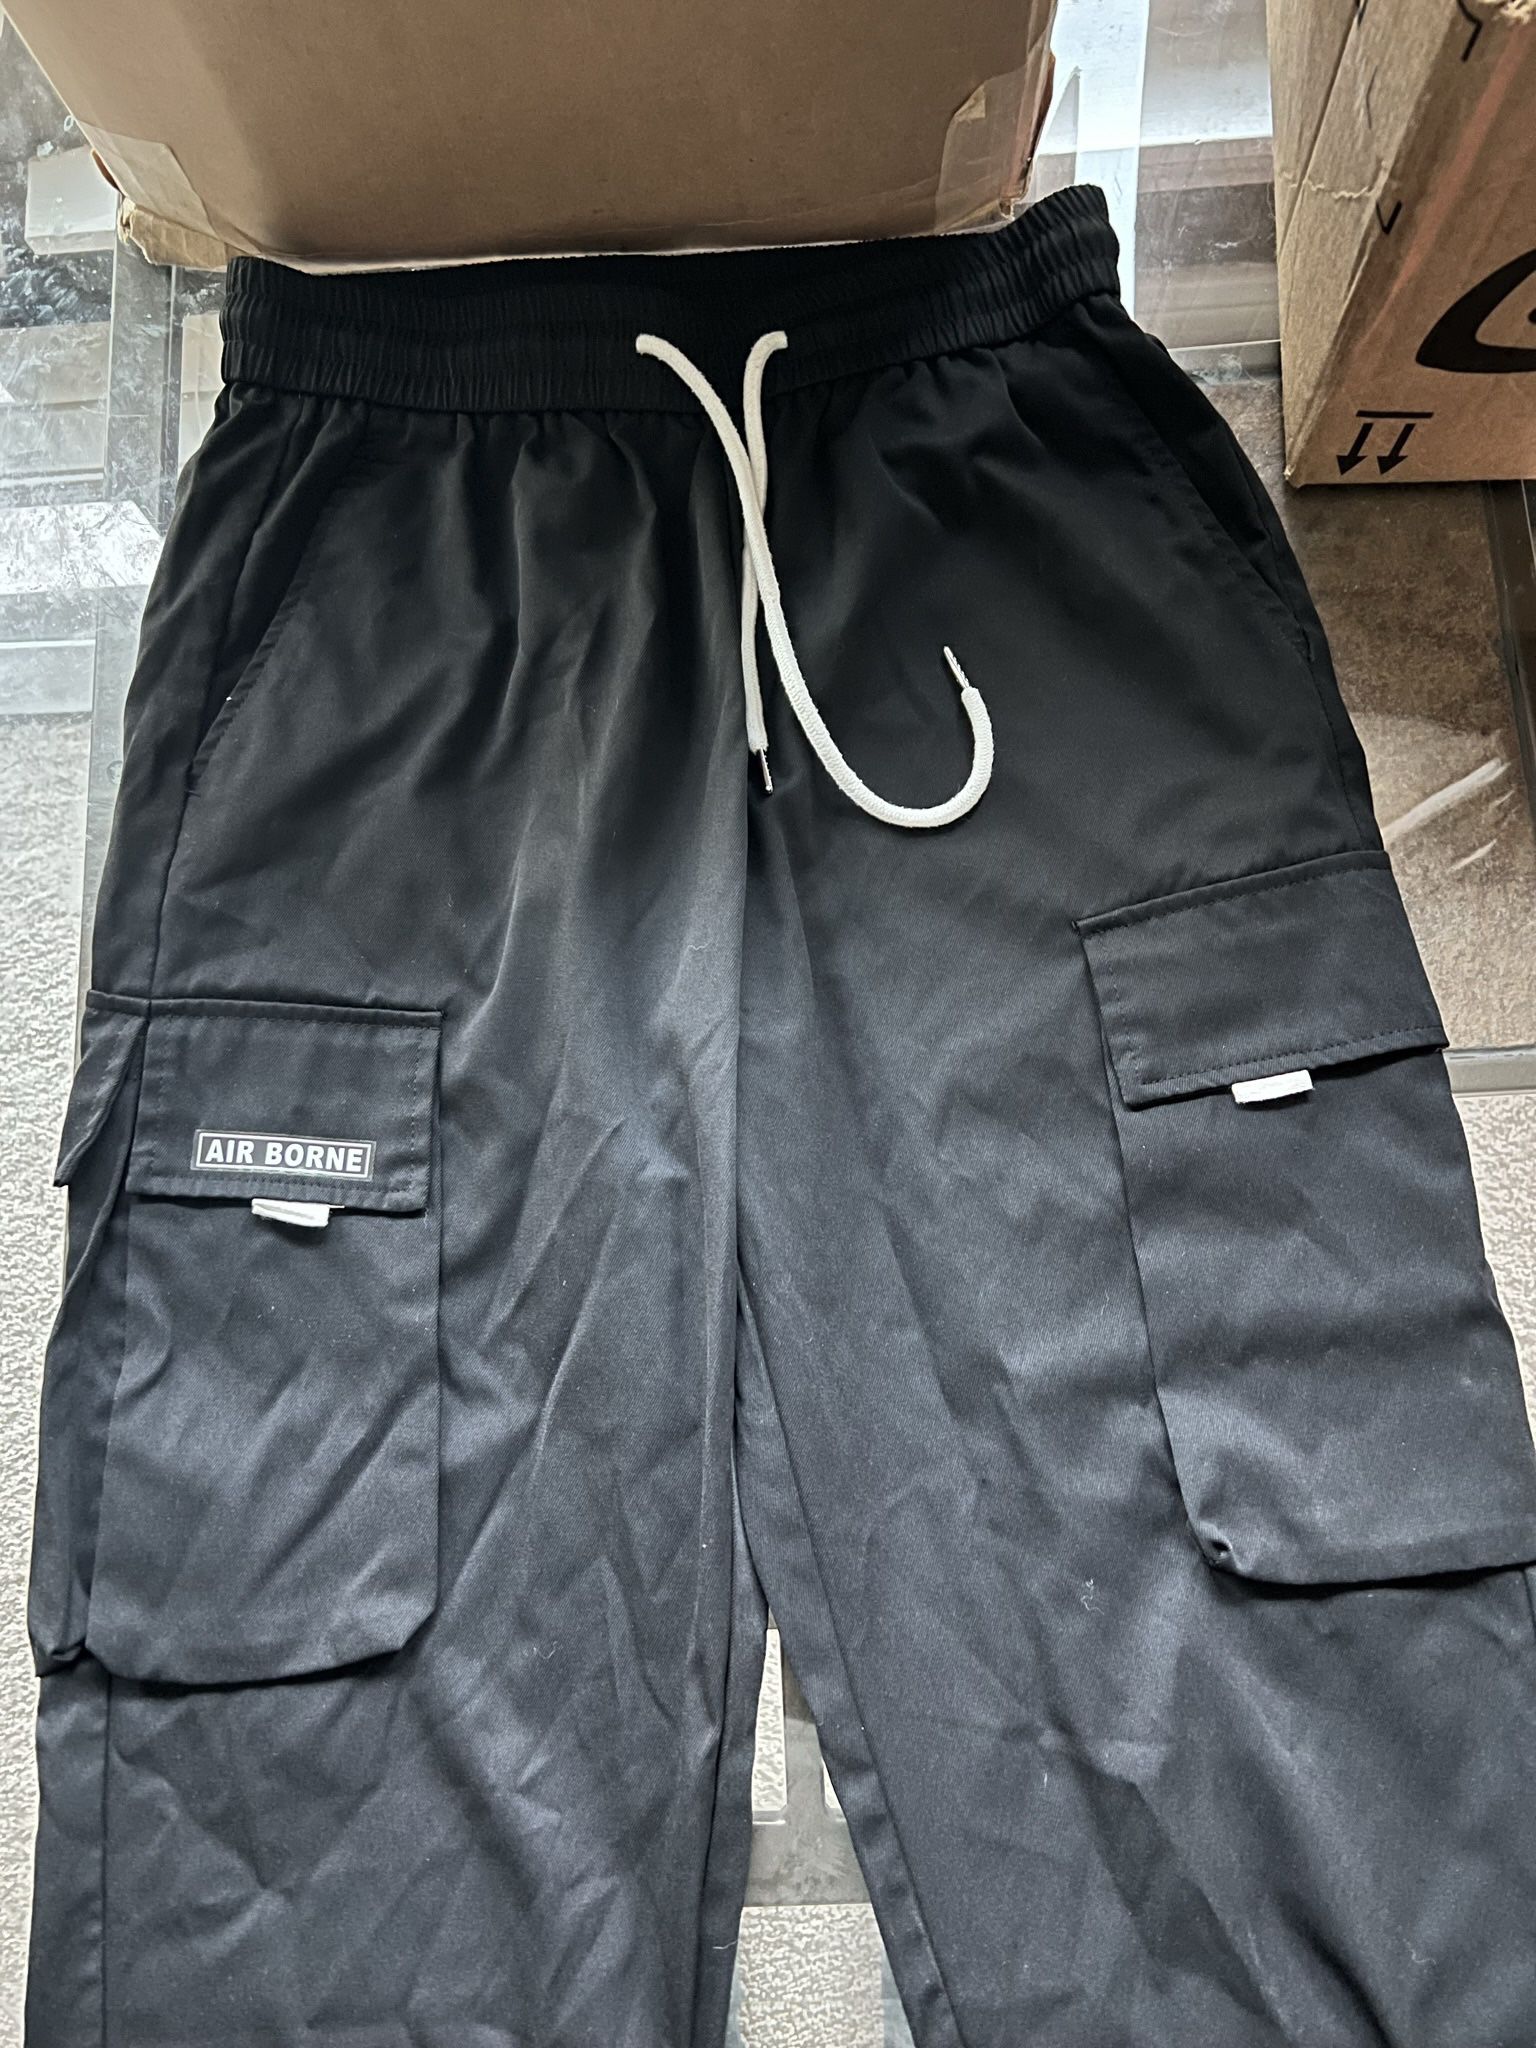 SHEIN Cargo Pants for Sale in Spring, TX - OfferUp